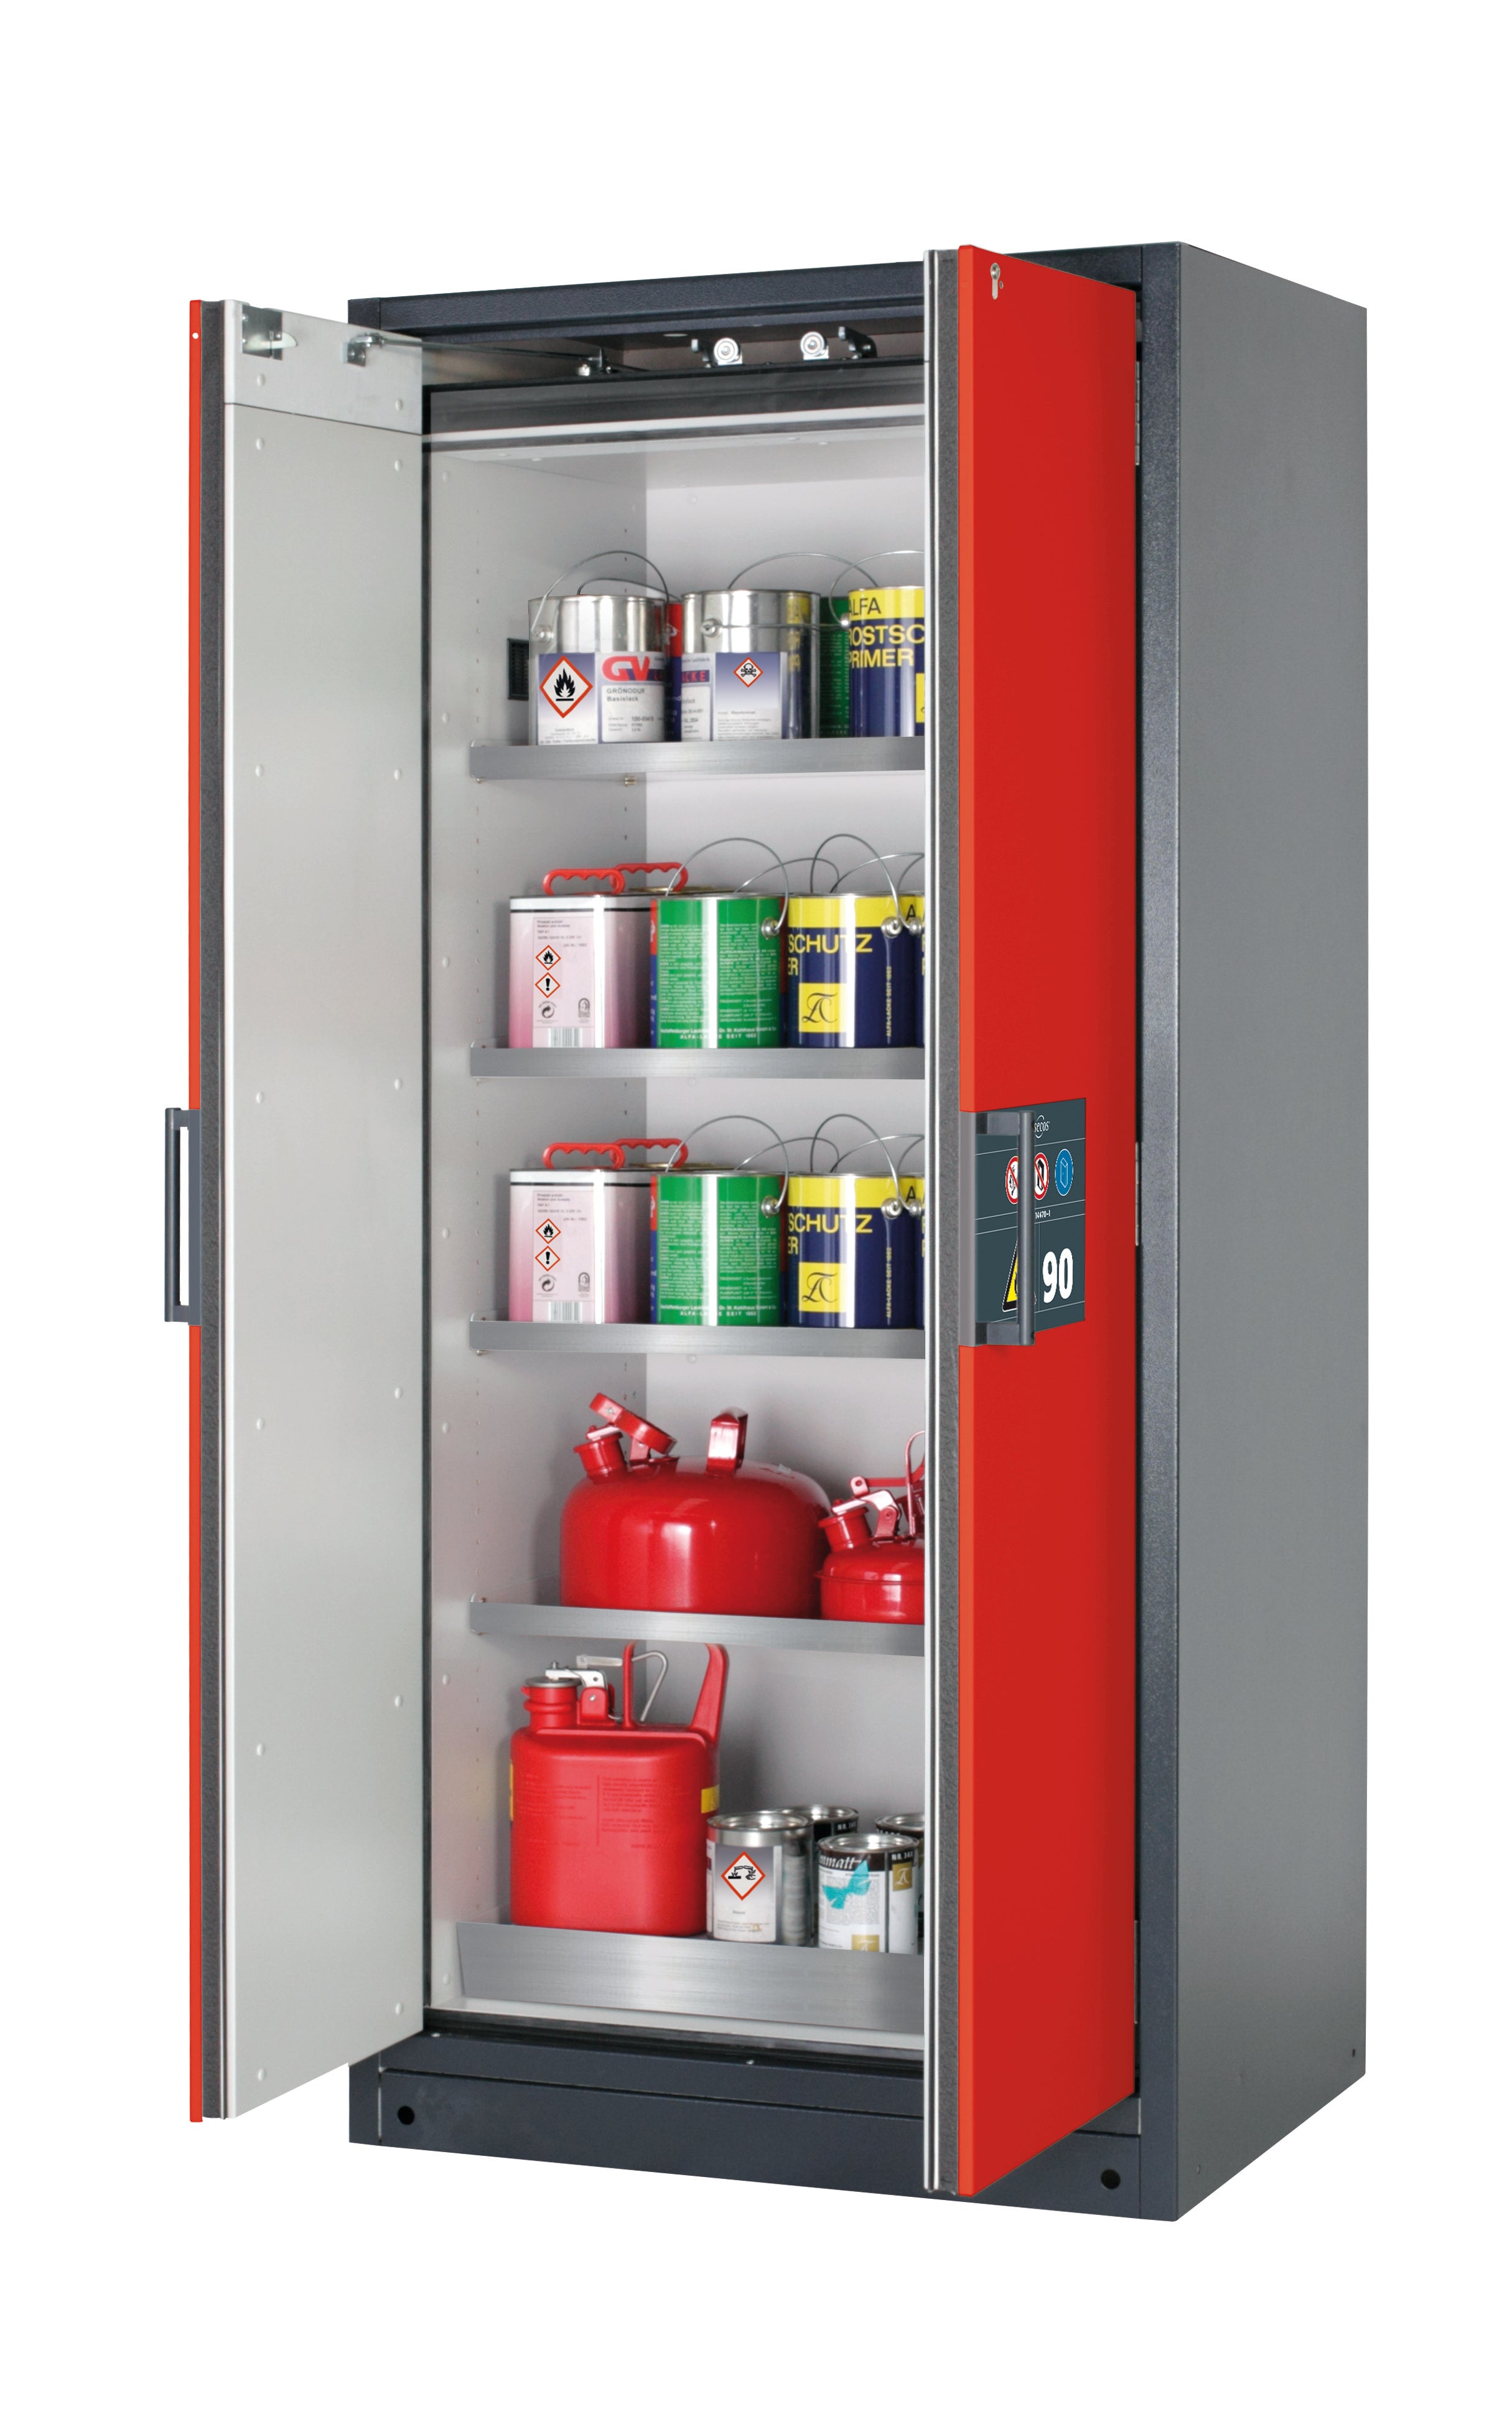 Type 90 safety storage cabinet Q-CLASSIC-90 model Q90.195.090 in traffic red RAL 3020 with 4x shelf standard (stainless steel 1.4301),